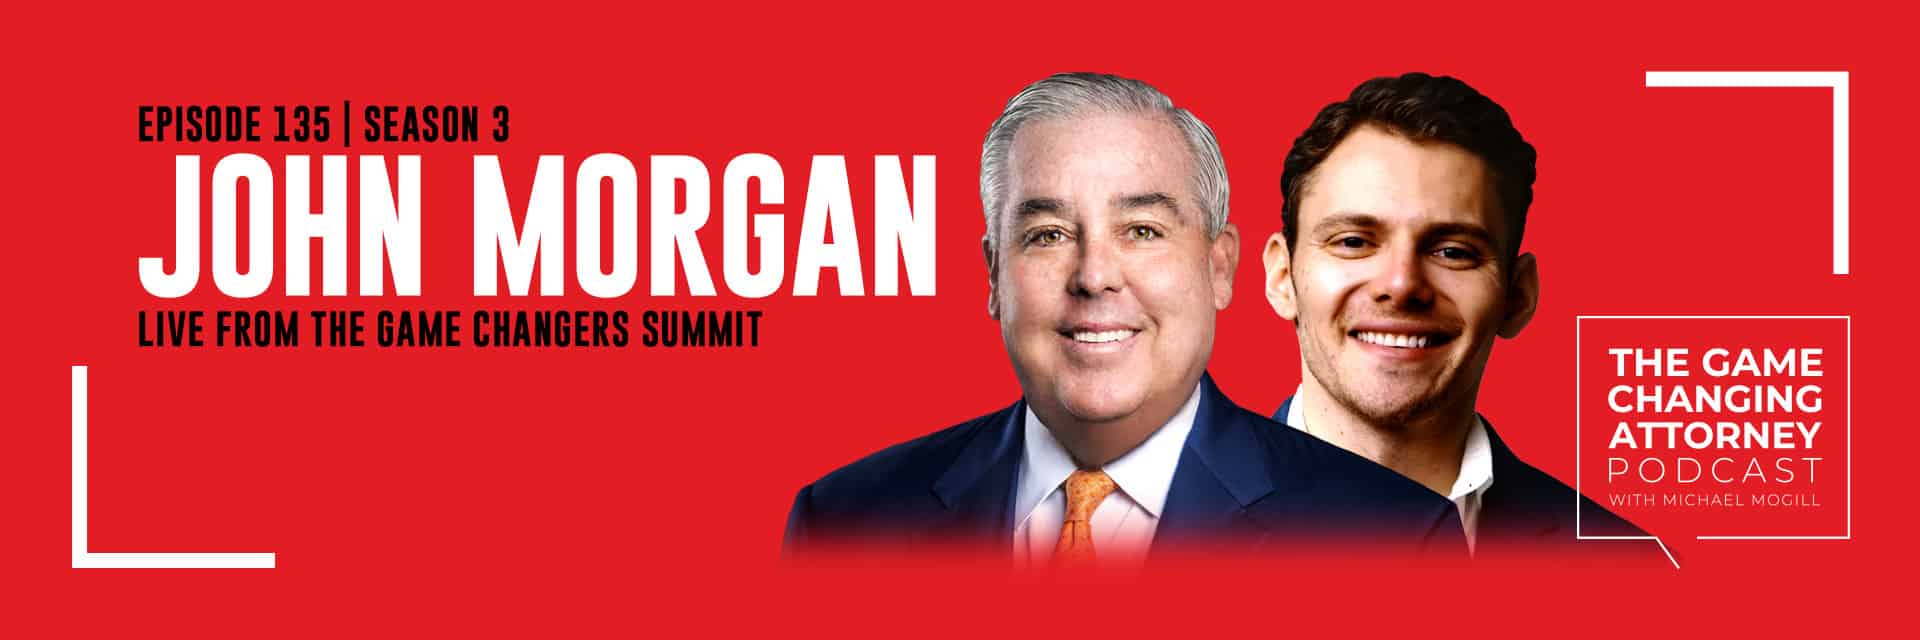 The Game Changing Attorney Podcast - John Morgan